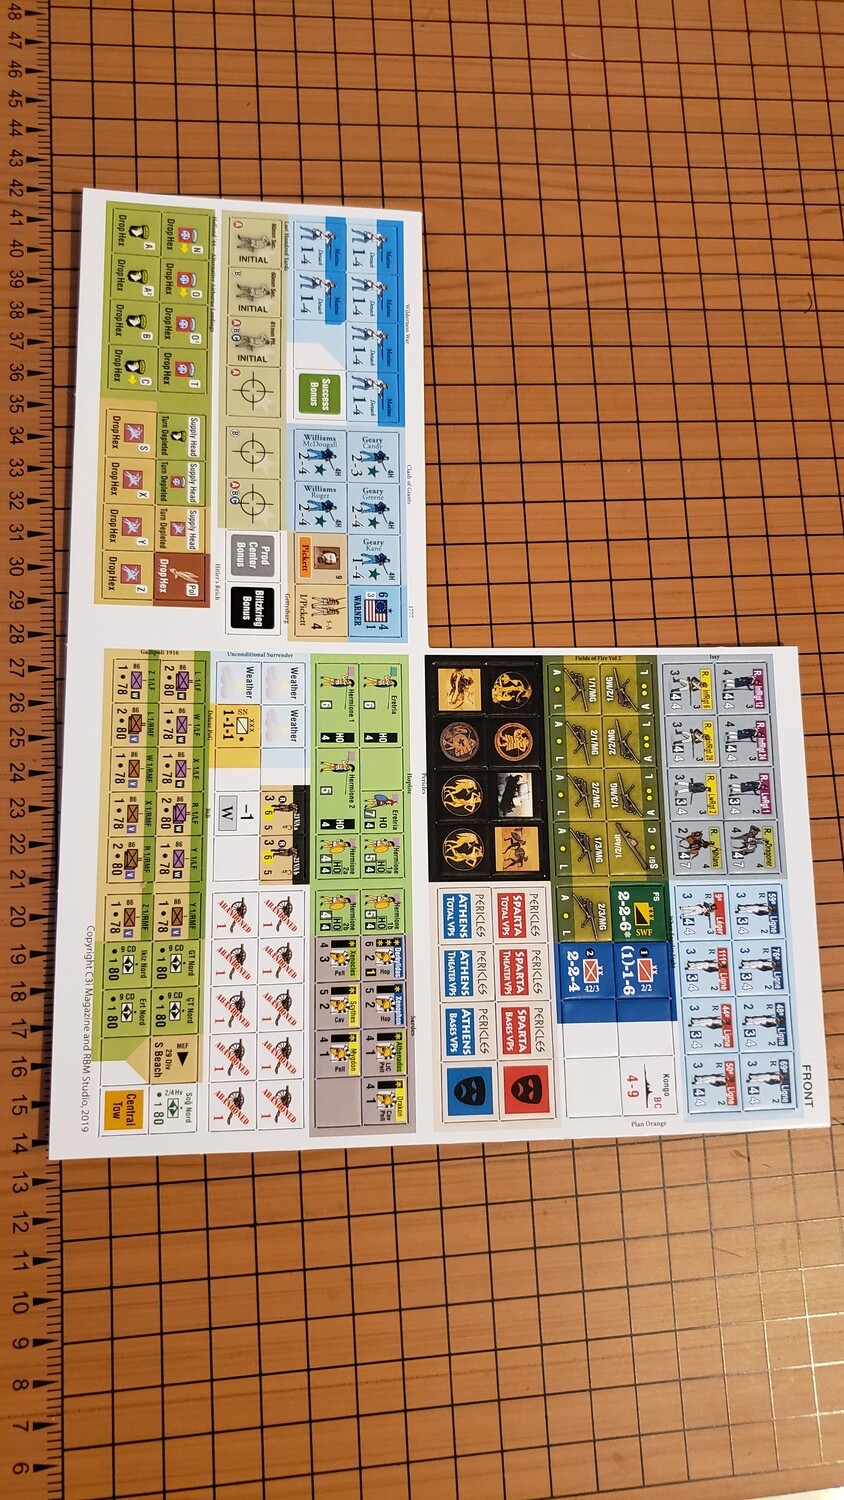 C3i Nr 33 Countersheet without Waterloo Counters